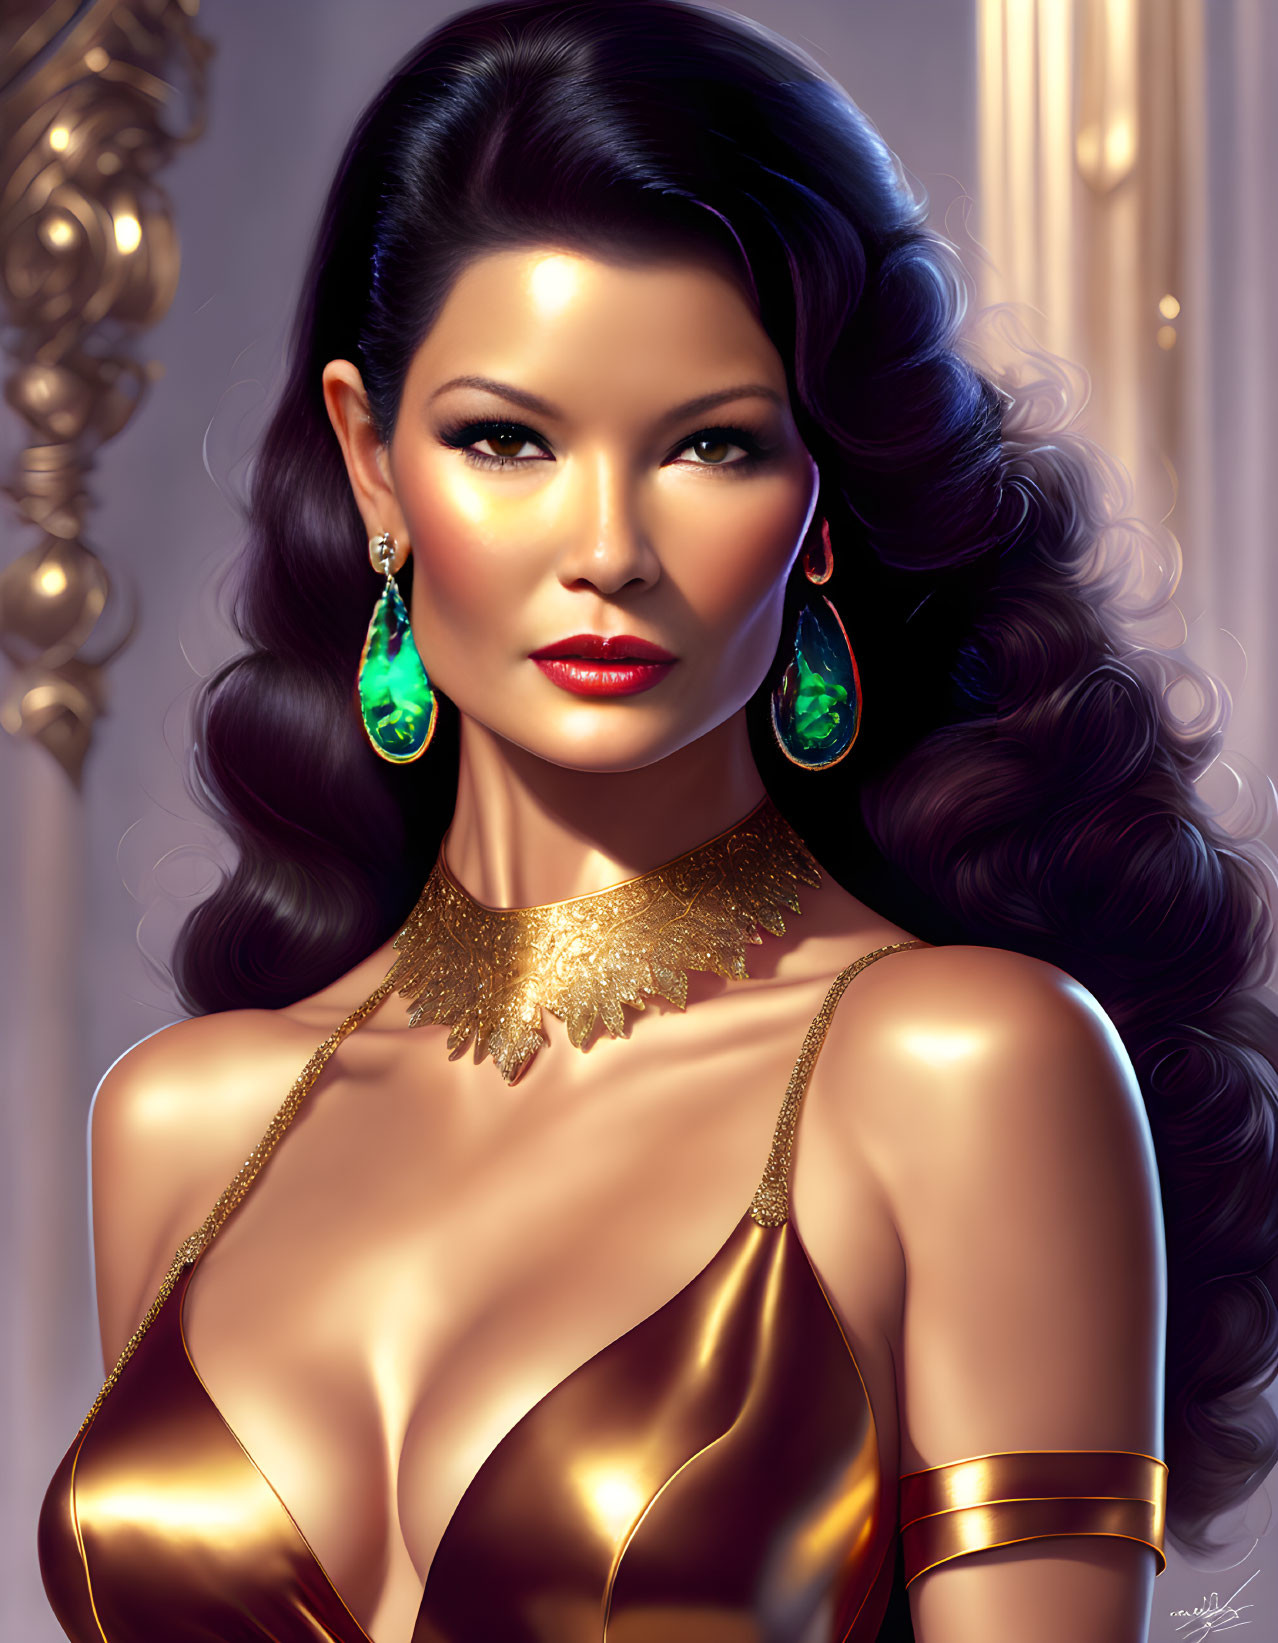 Illustrated portrait of woman with wavy hair in gold dress and jewelry